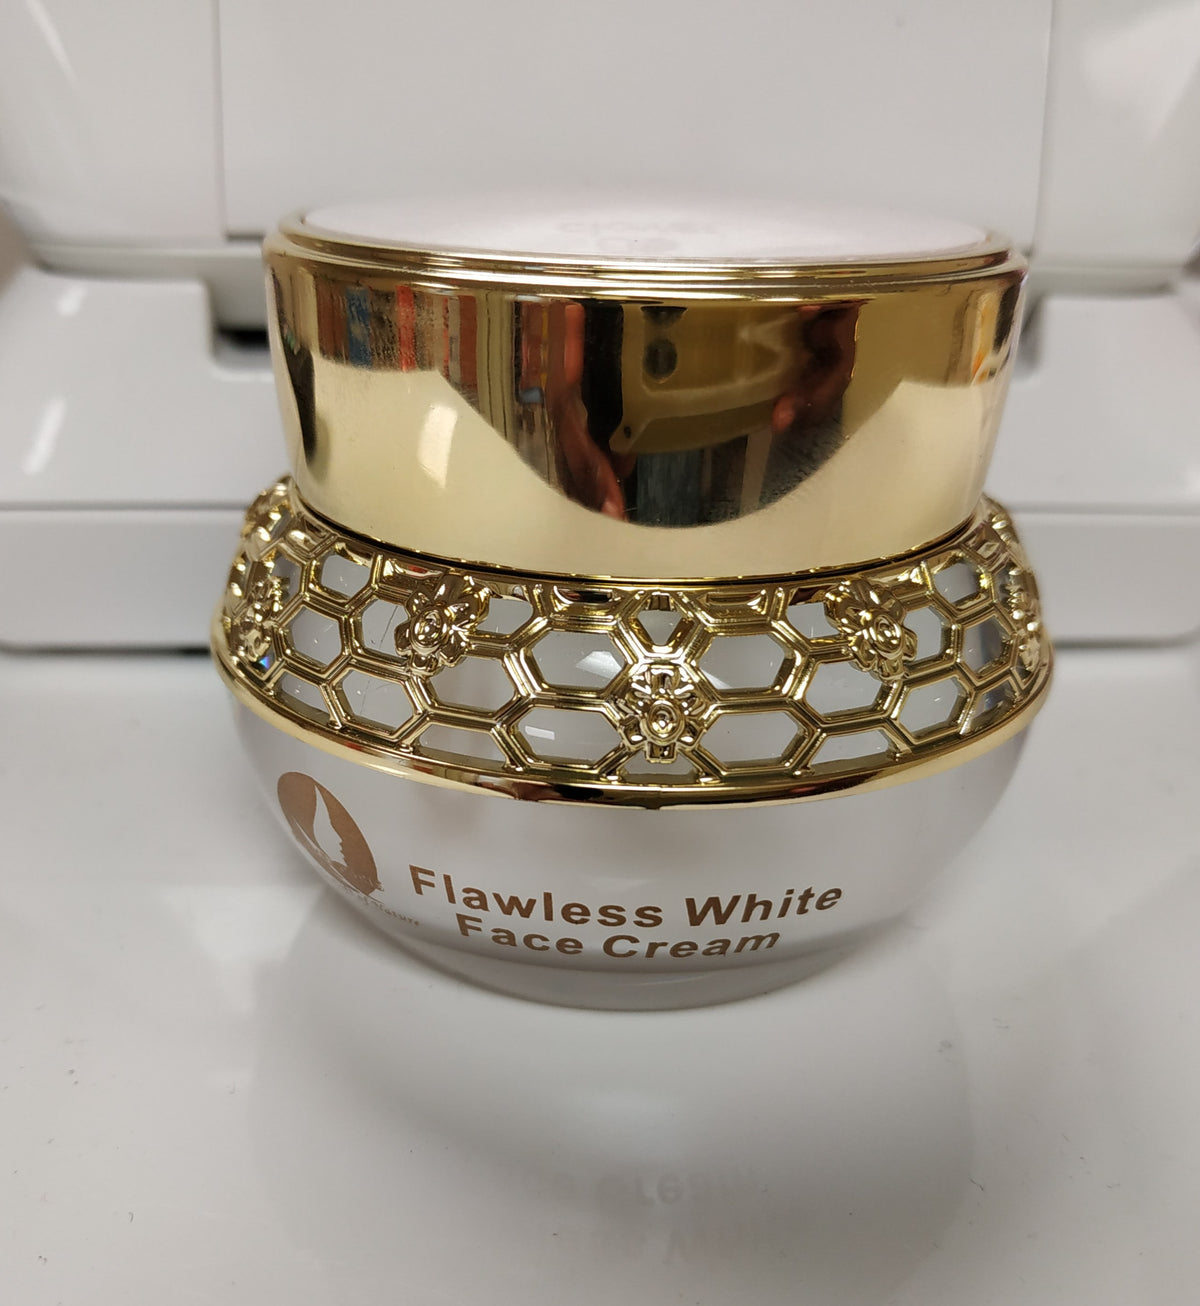 Flawless white face cream with spf 30.50g